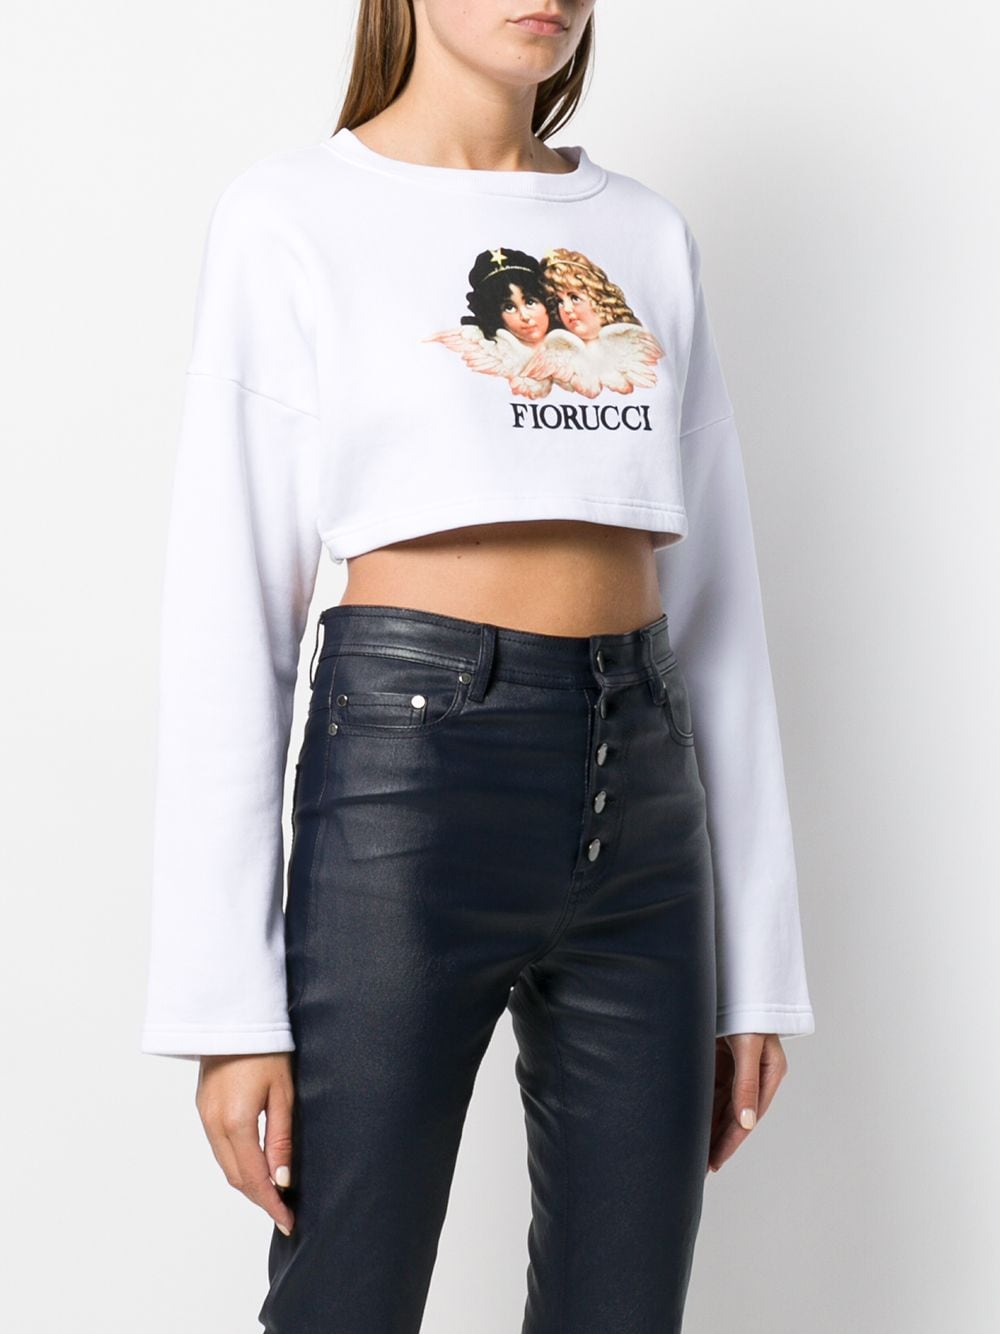 Shop Fiorucci Vintage Angels cropped sweatshirt with Express Delivery ...